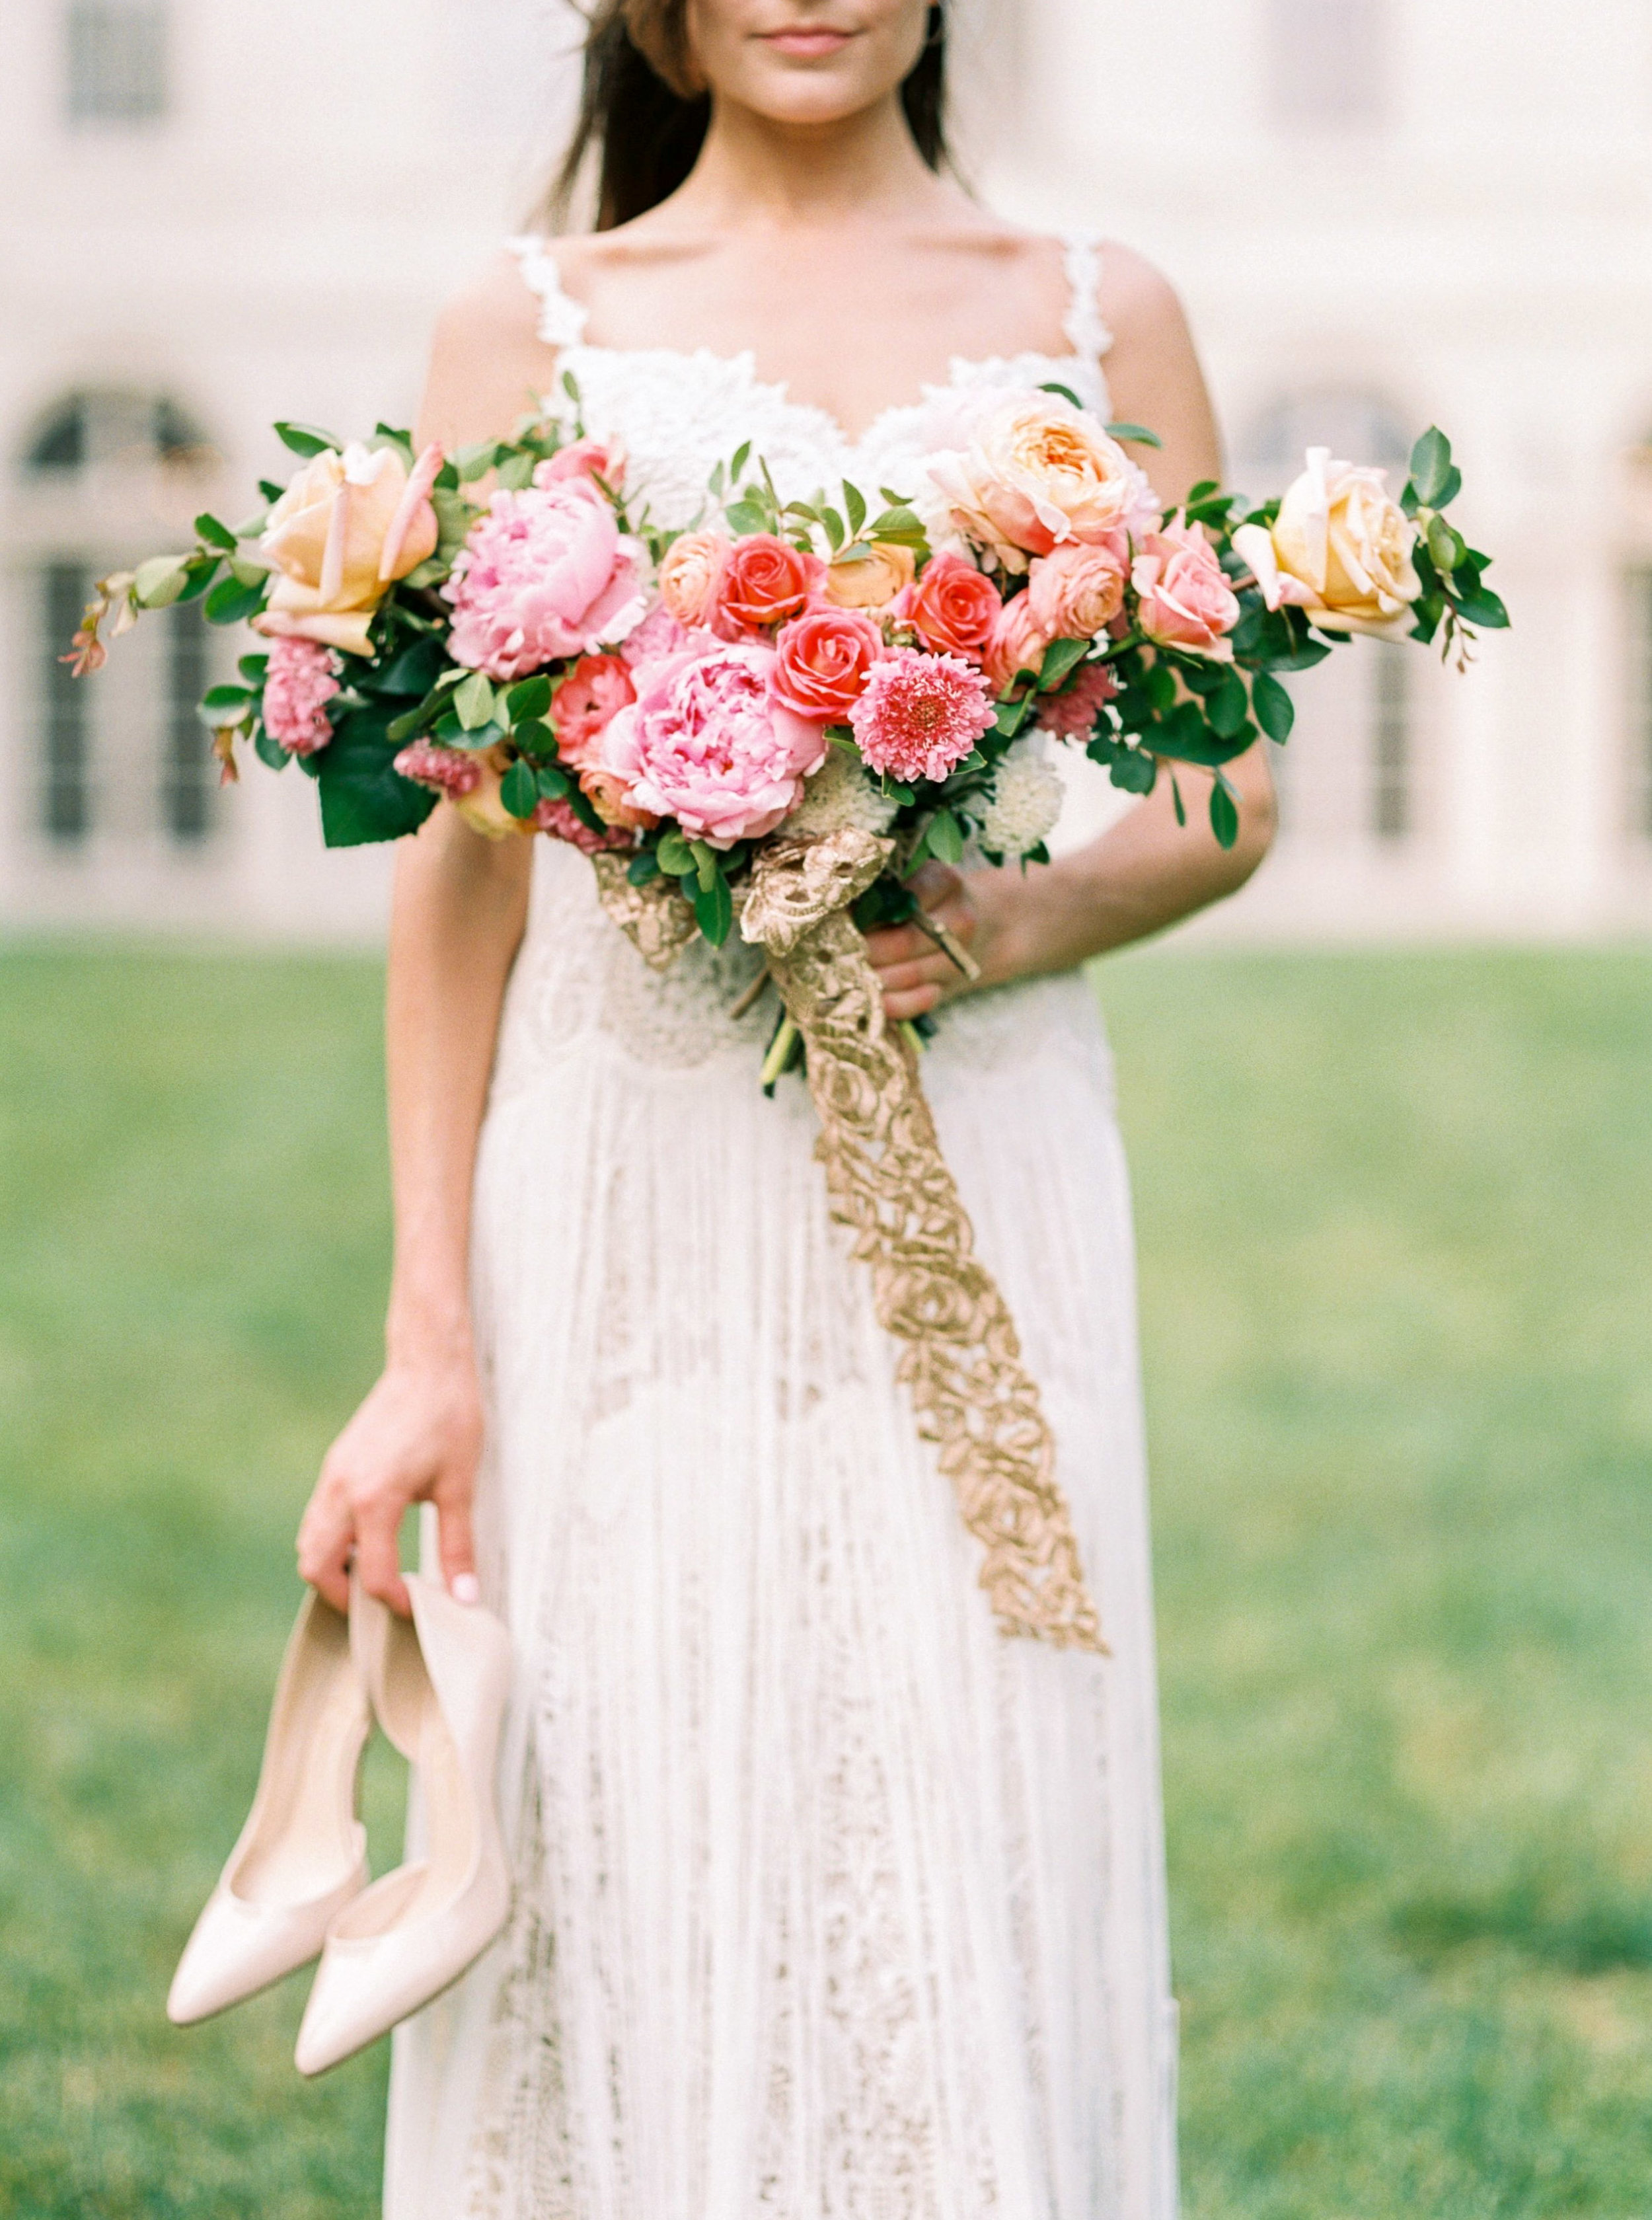 Nine Five Photography-Styled Shoots Across America-Wadsworth Mansion (17 of 29).jpg